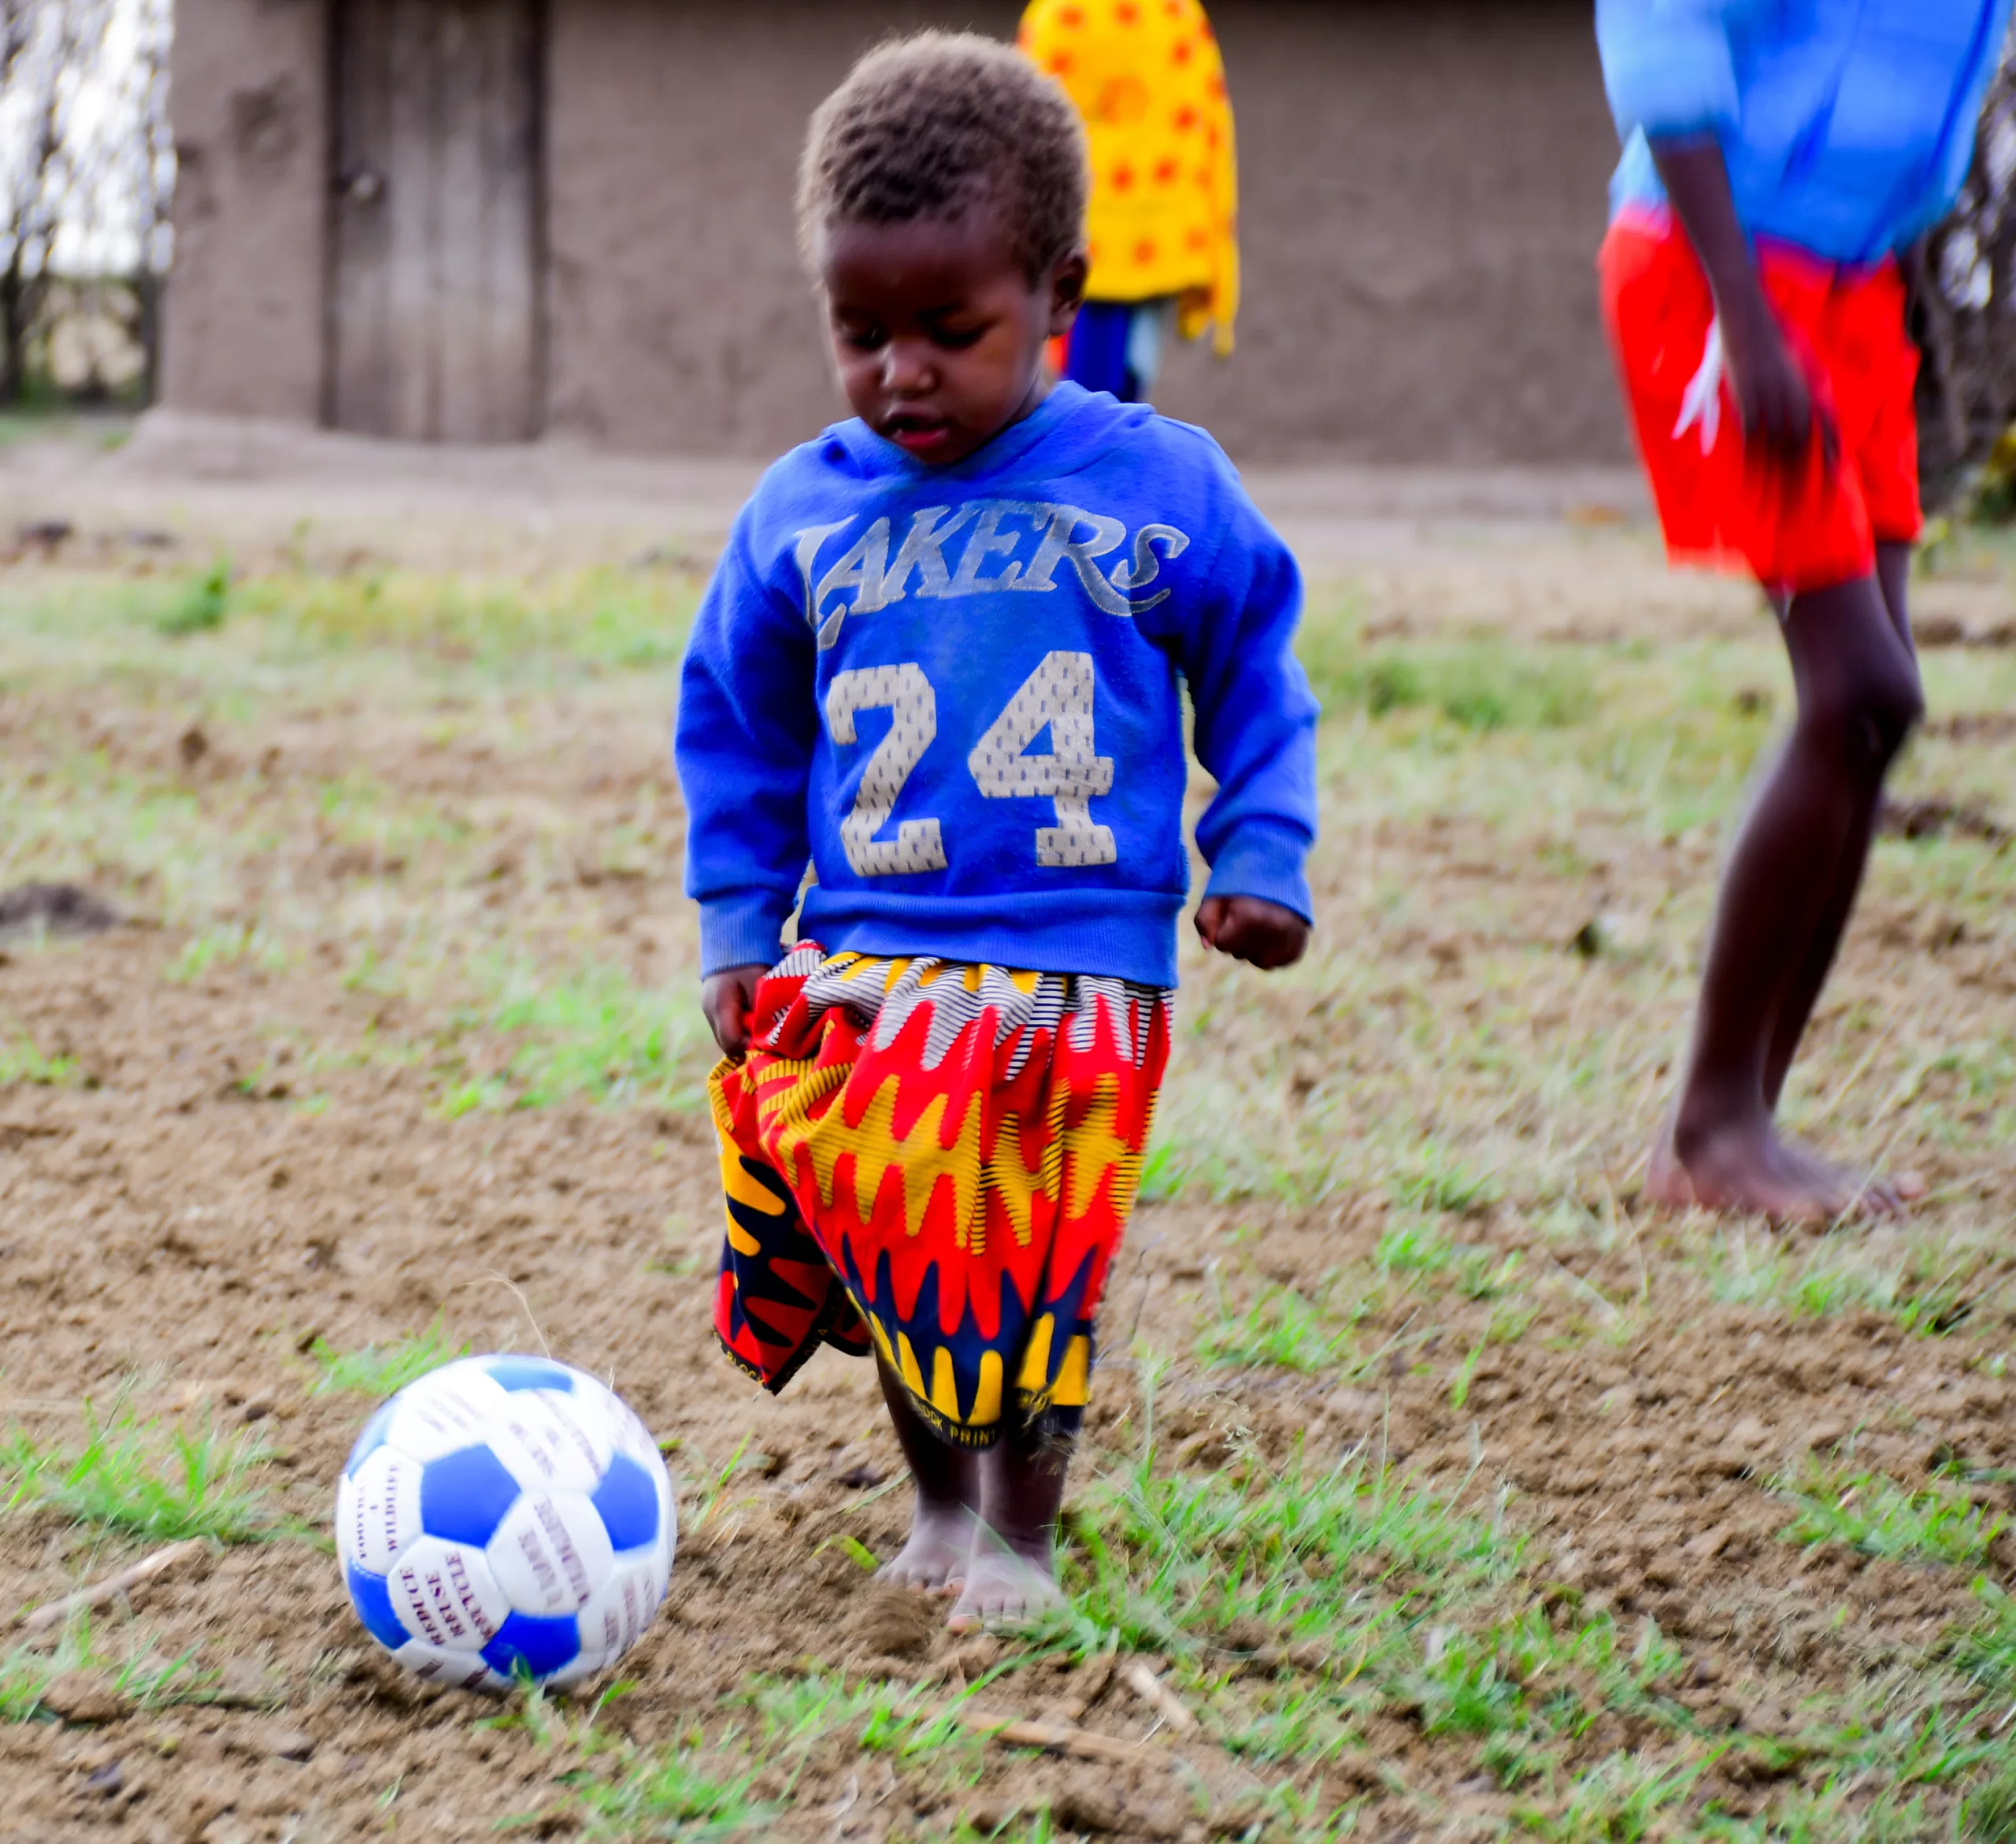 Reflecting on the Success of StreetFootball4Children